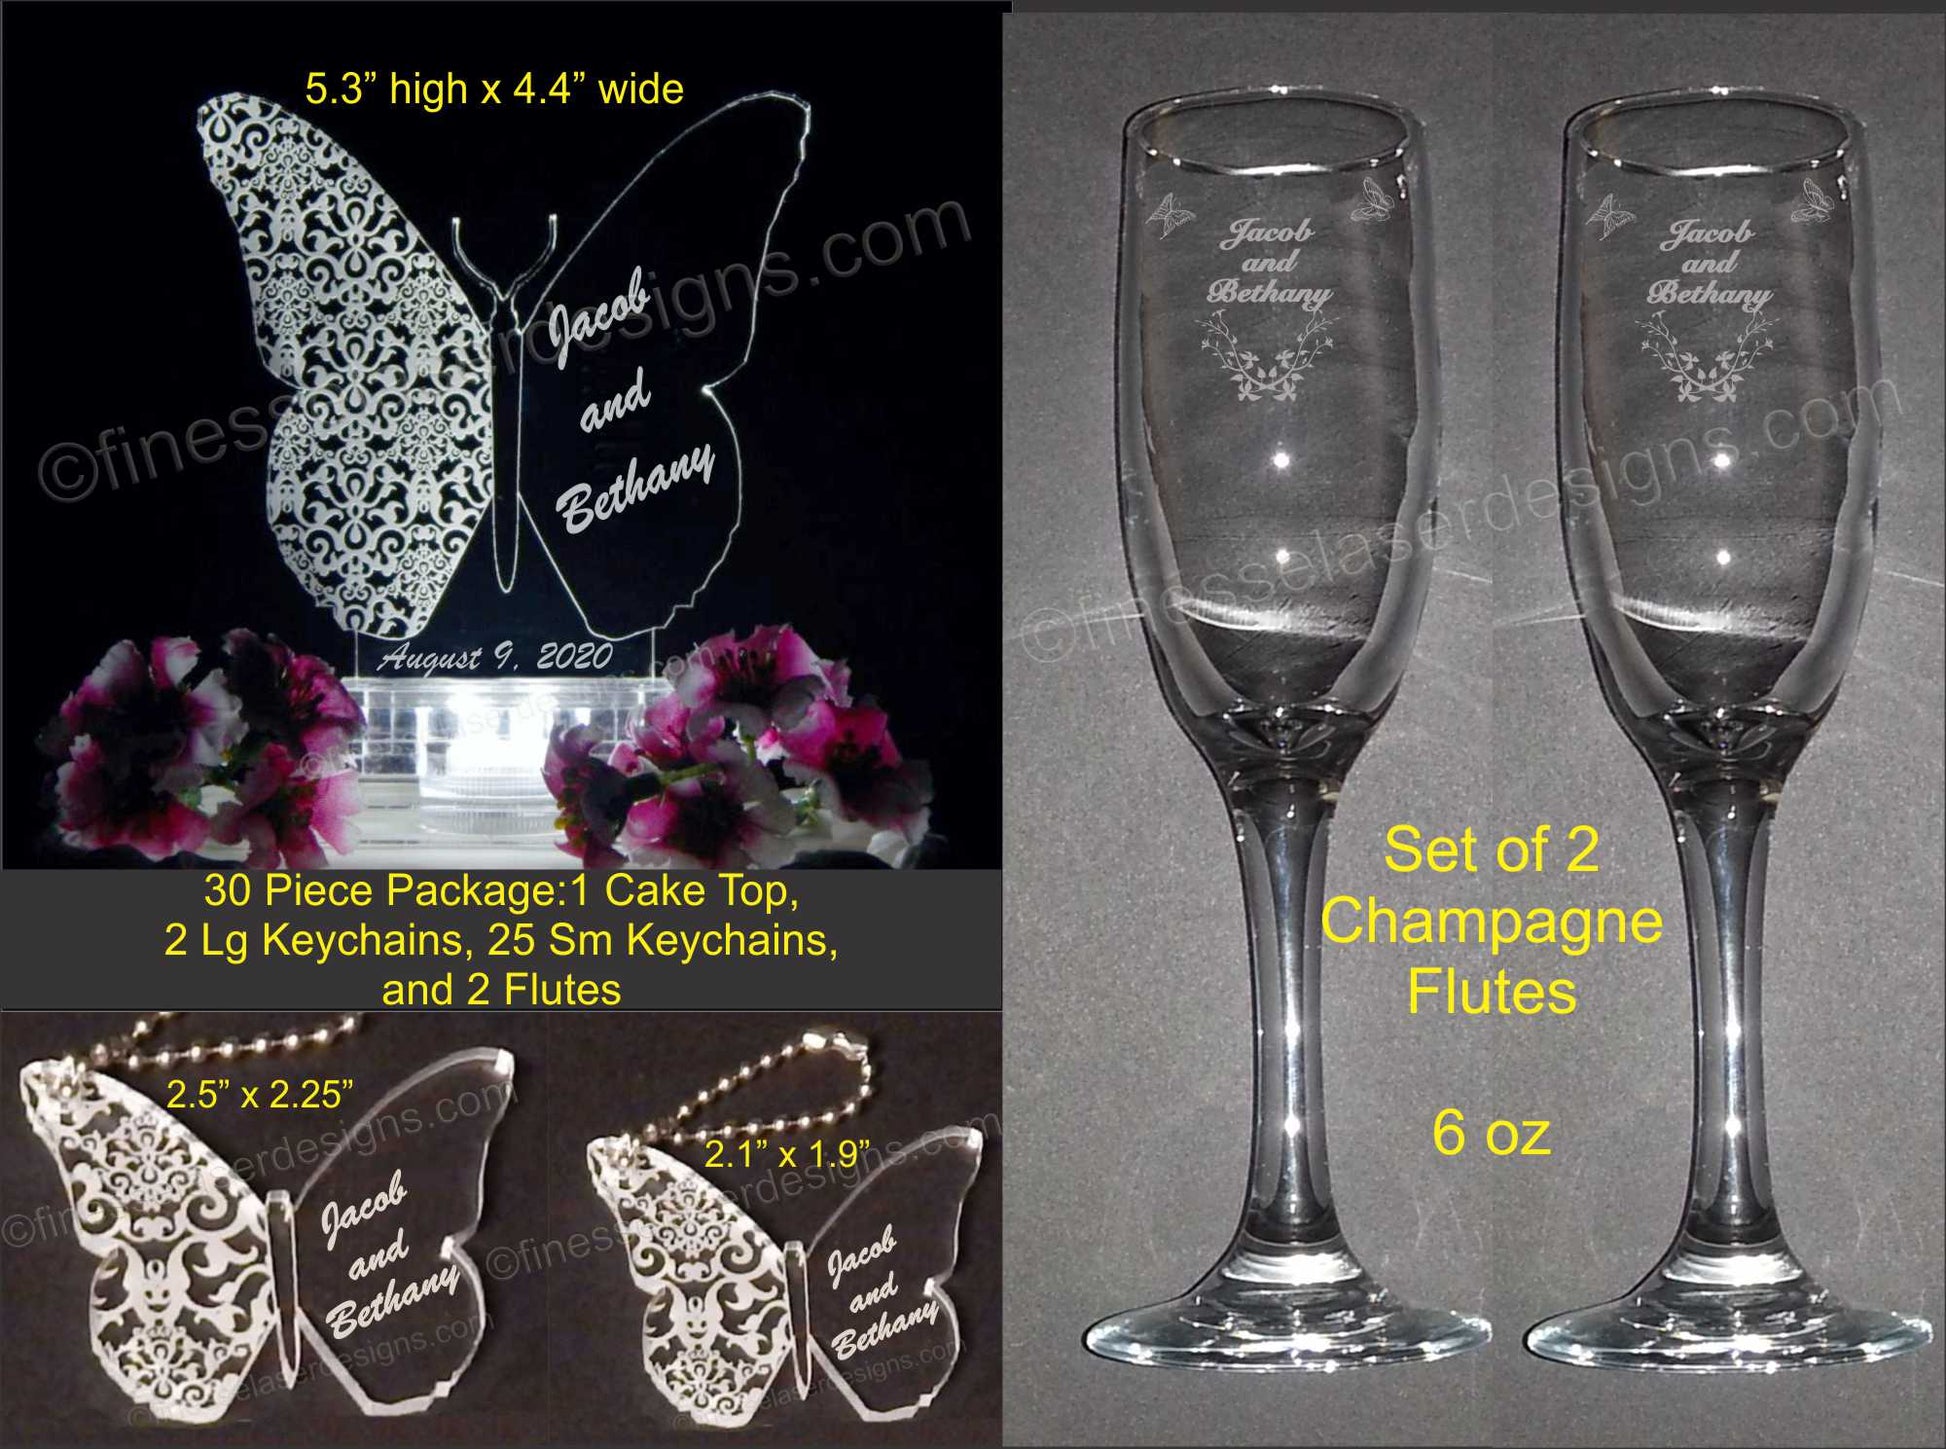 photo shows package that includes butterfly shaped acrylic cake topper, 2 sized of keychains, and a set of champagne flutes with dimensions and information